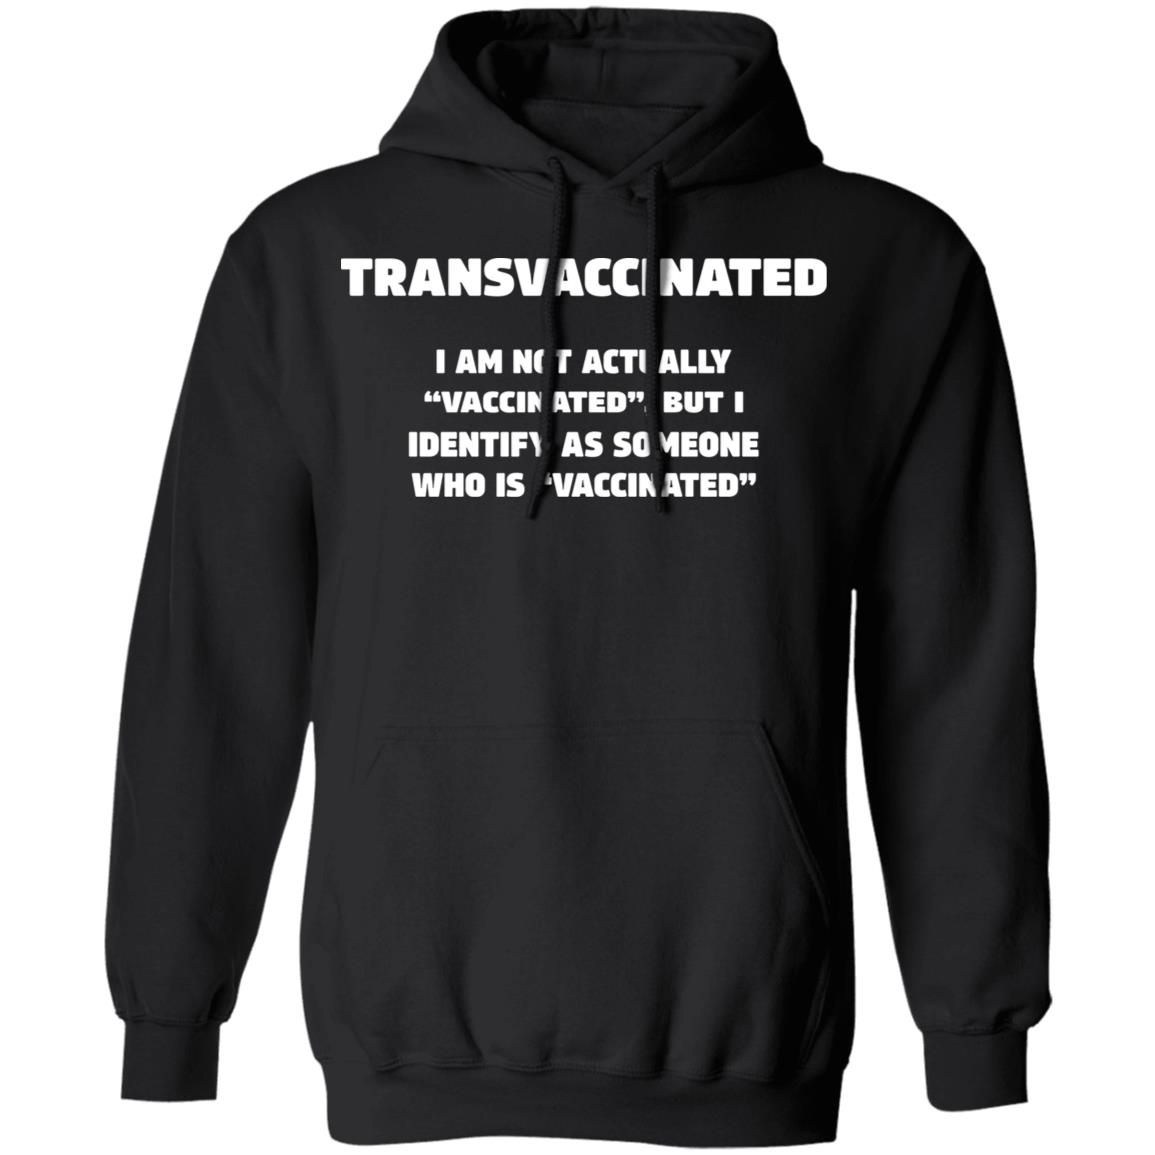 Funny Trans Vaccinated Tshirt Cute Vaccine Meme Shirt Style: Hoodie, Color: Black